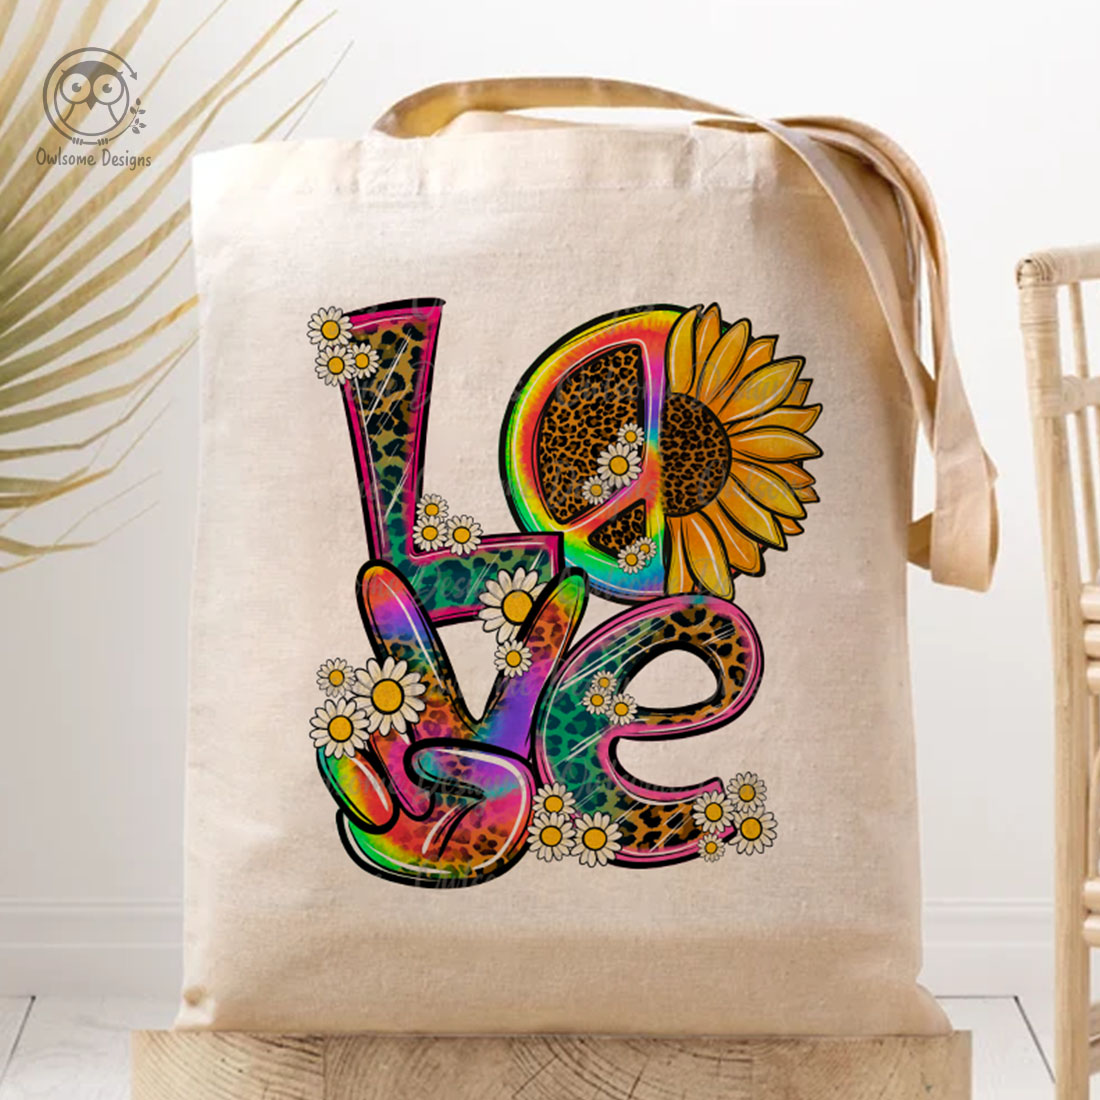 Image of a bag with a charming inscription love in the style of a hippie.